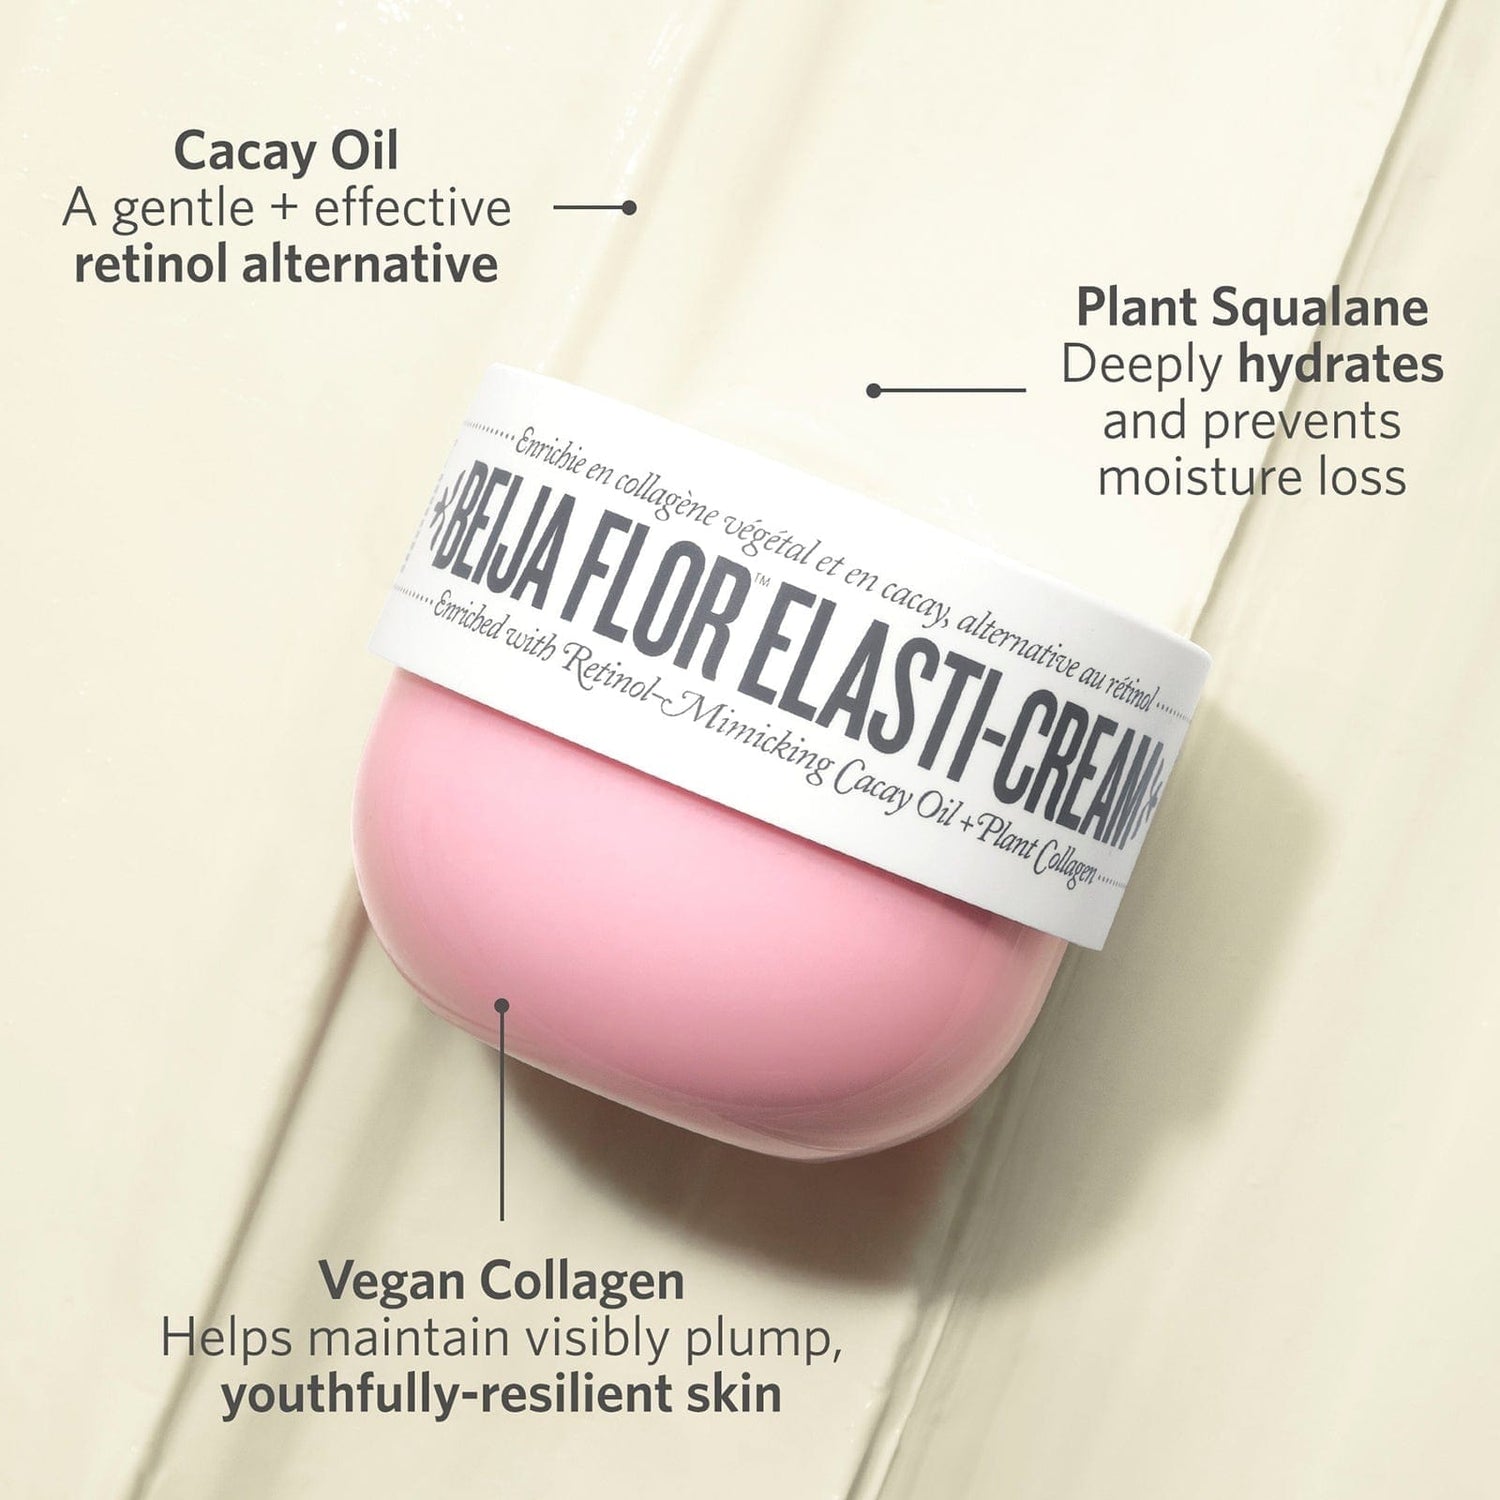 Cacay oil - a gentle + effective retinol alternative, plant squalane - deeply hydrates and prevents moisture loss, vegan collagen - helps maintain visibly plump, youthfully-resilient skin 